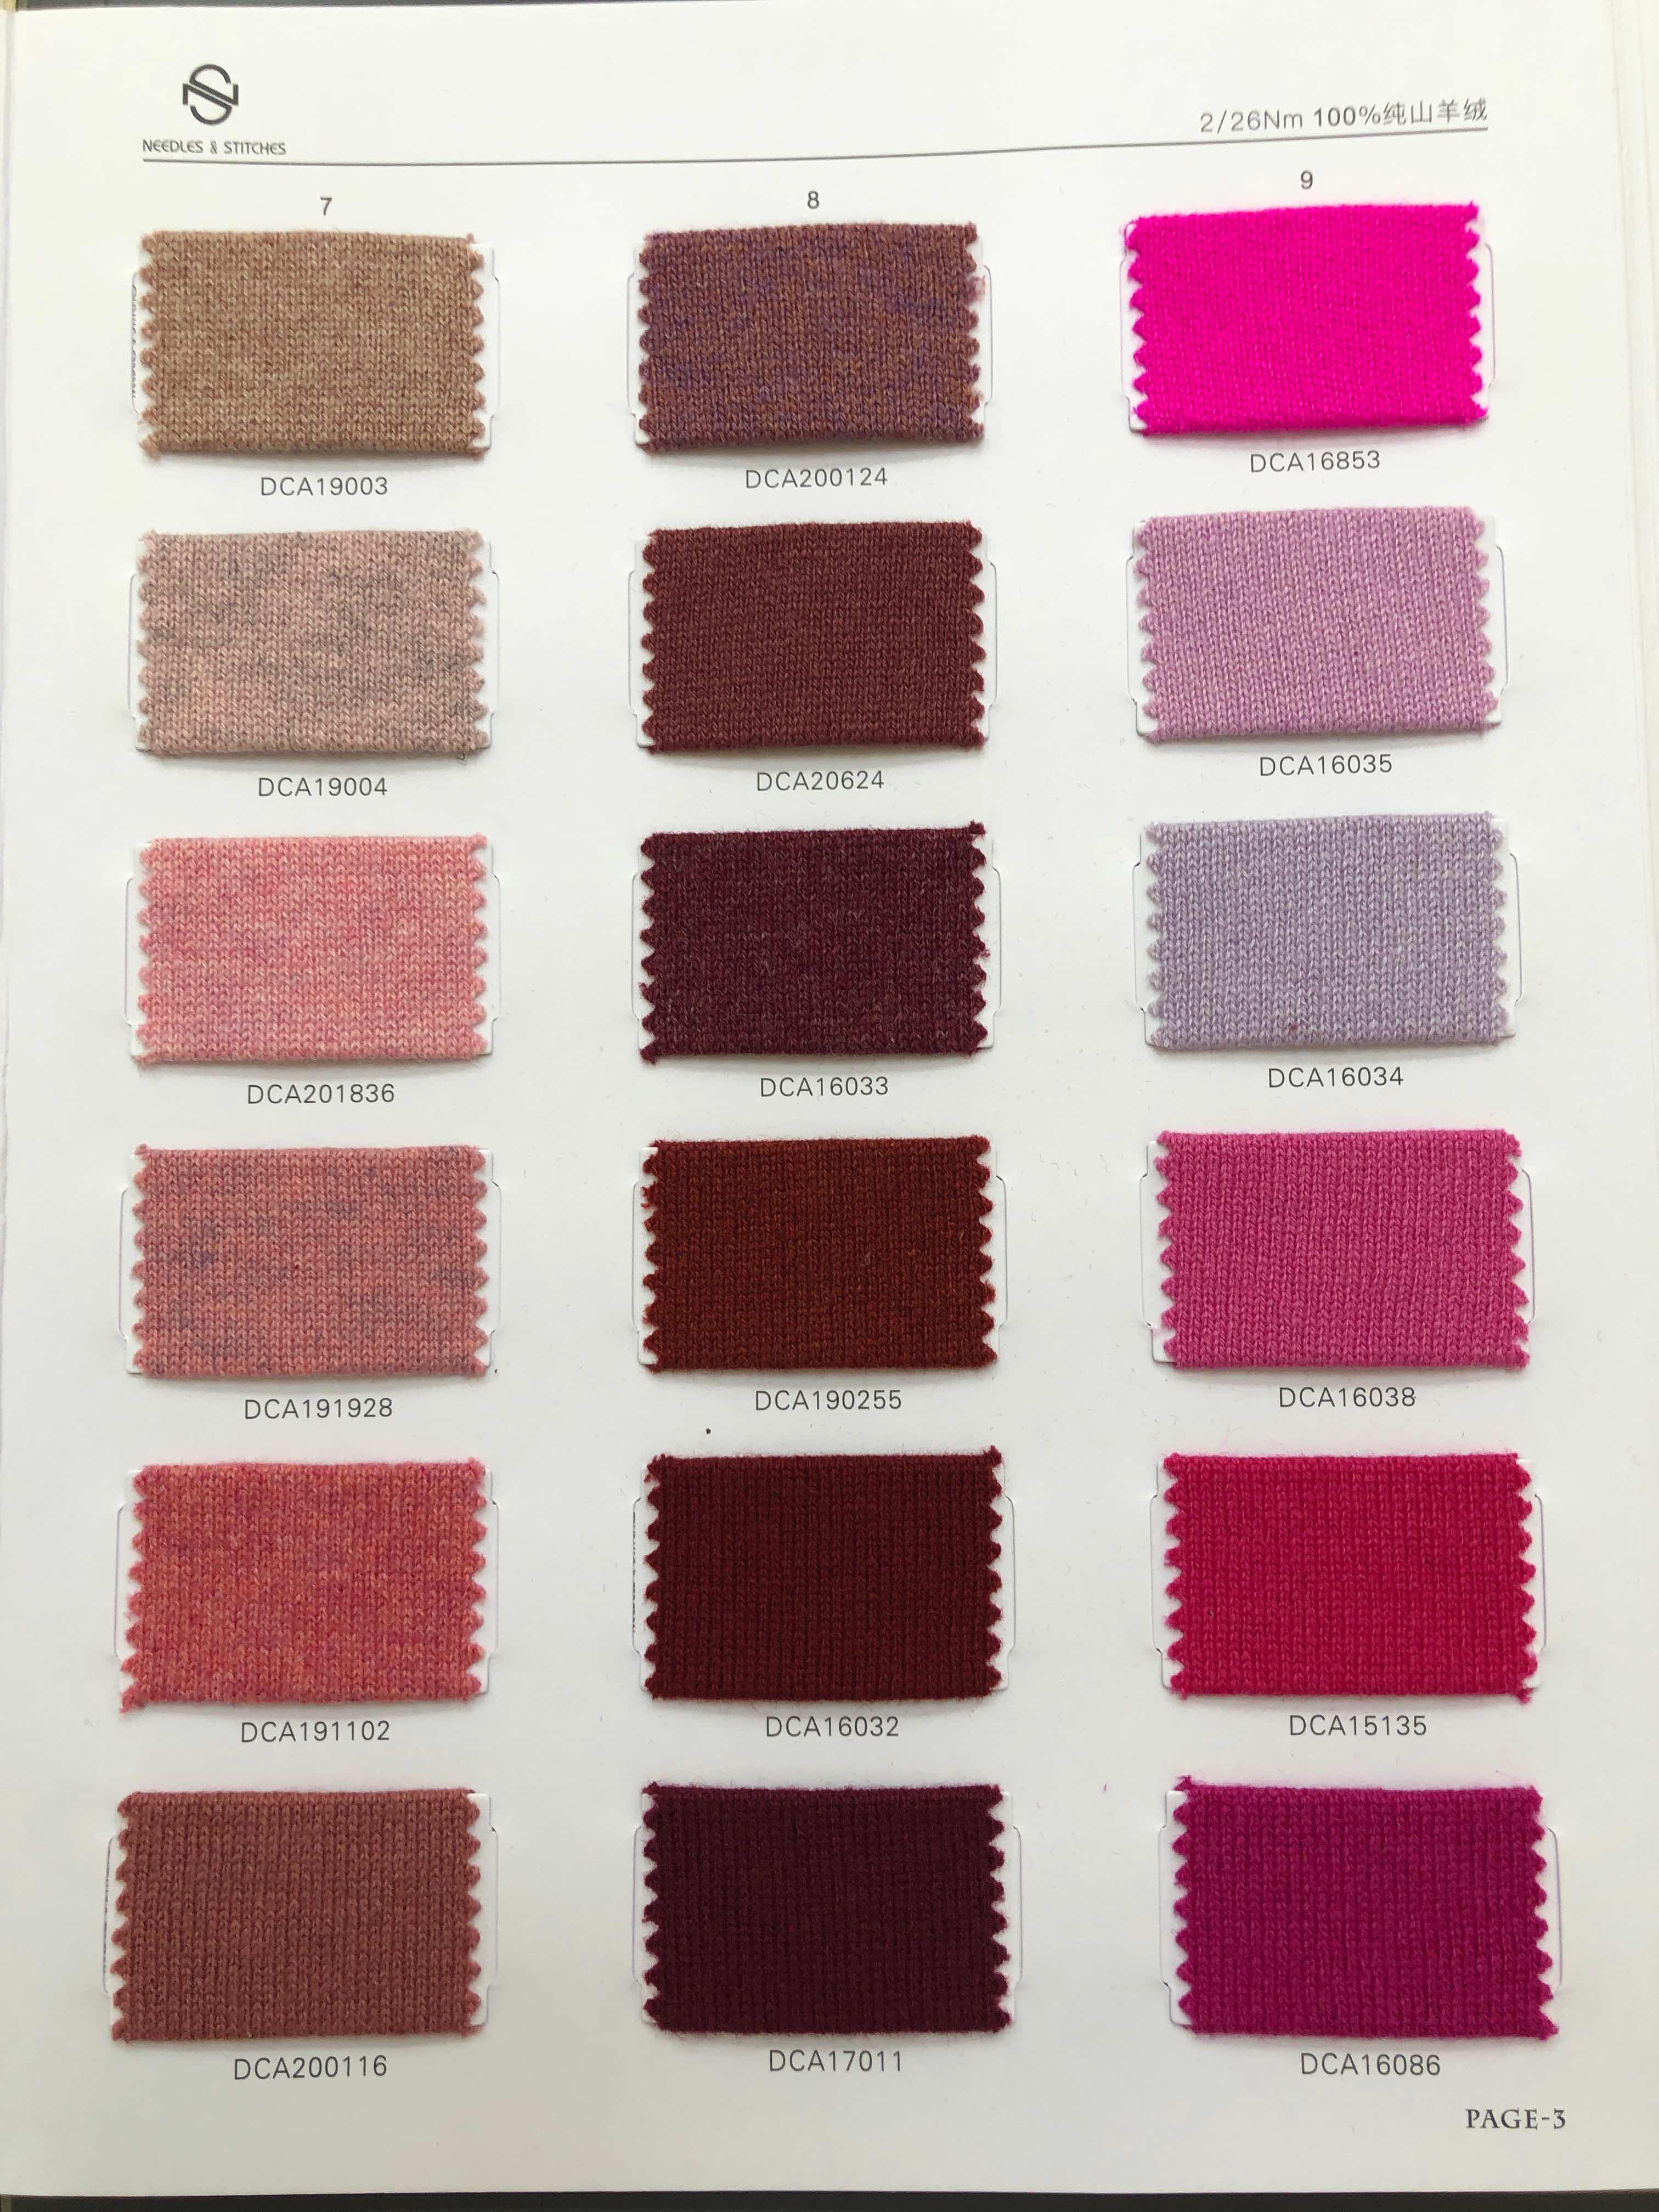 2/26 100%CASHMERE COLOR CARDS more than 180 colors page 1~3